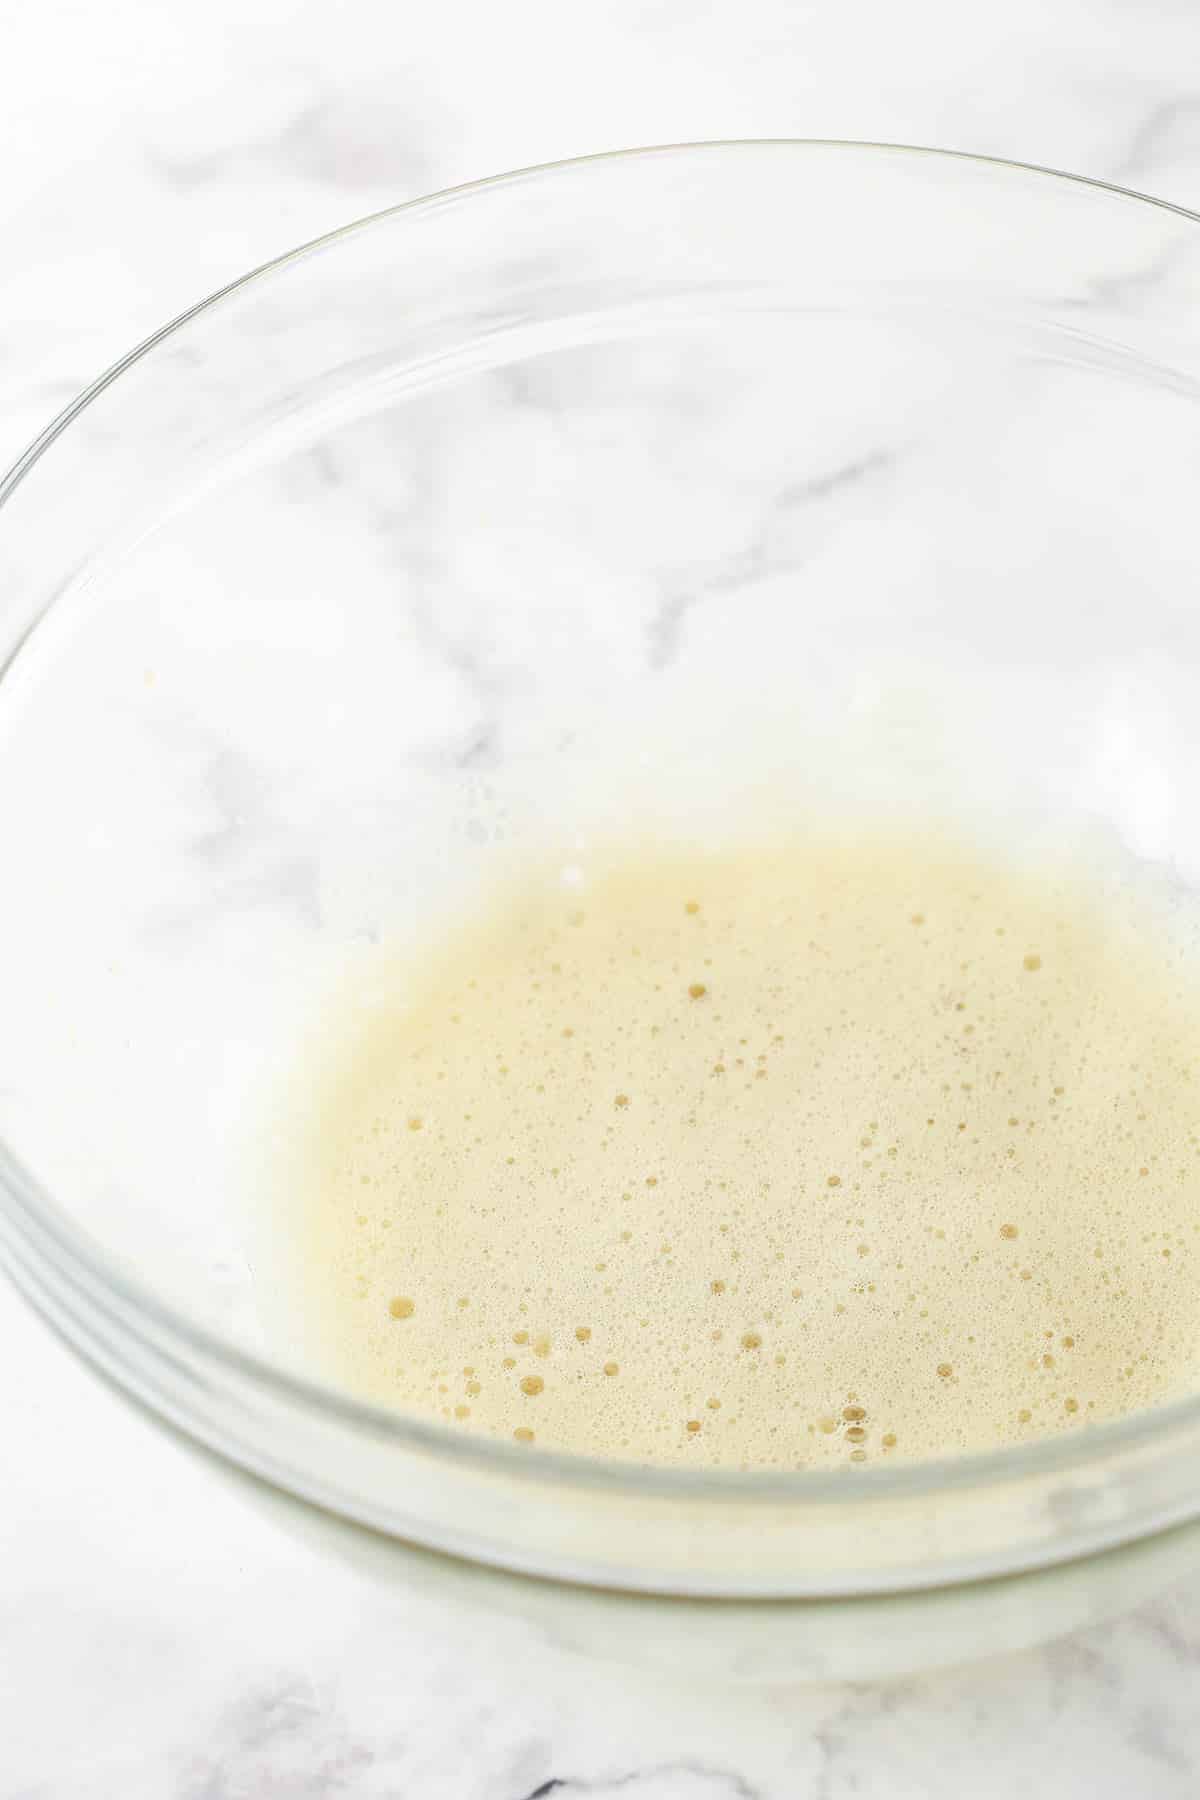 The whipped egg white and vanilla extract in a clear bowl